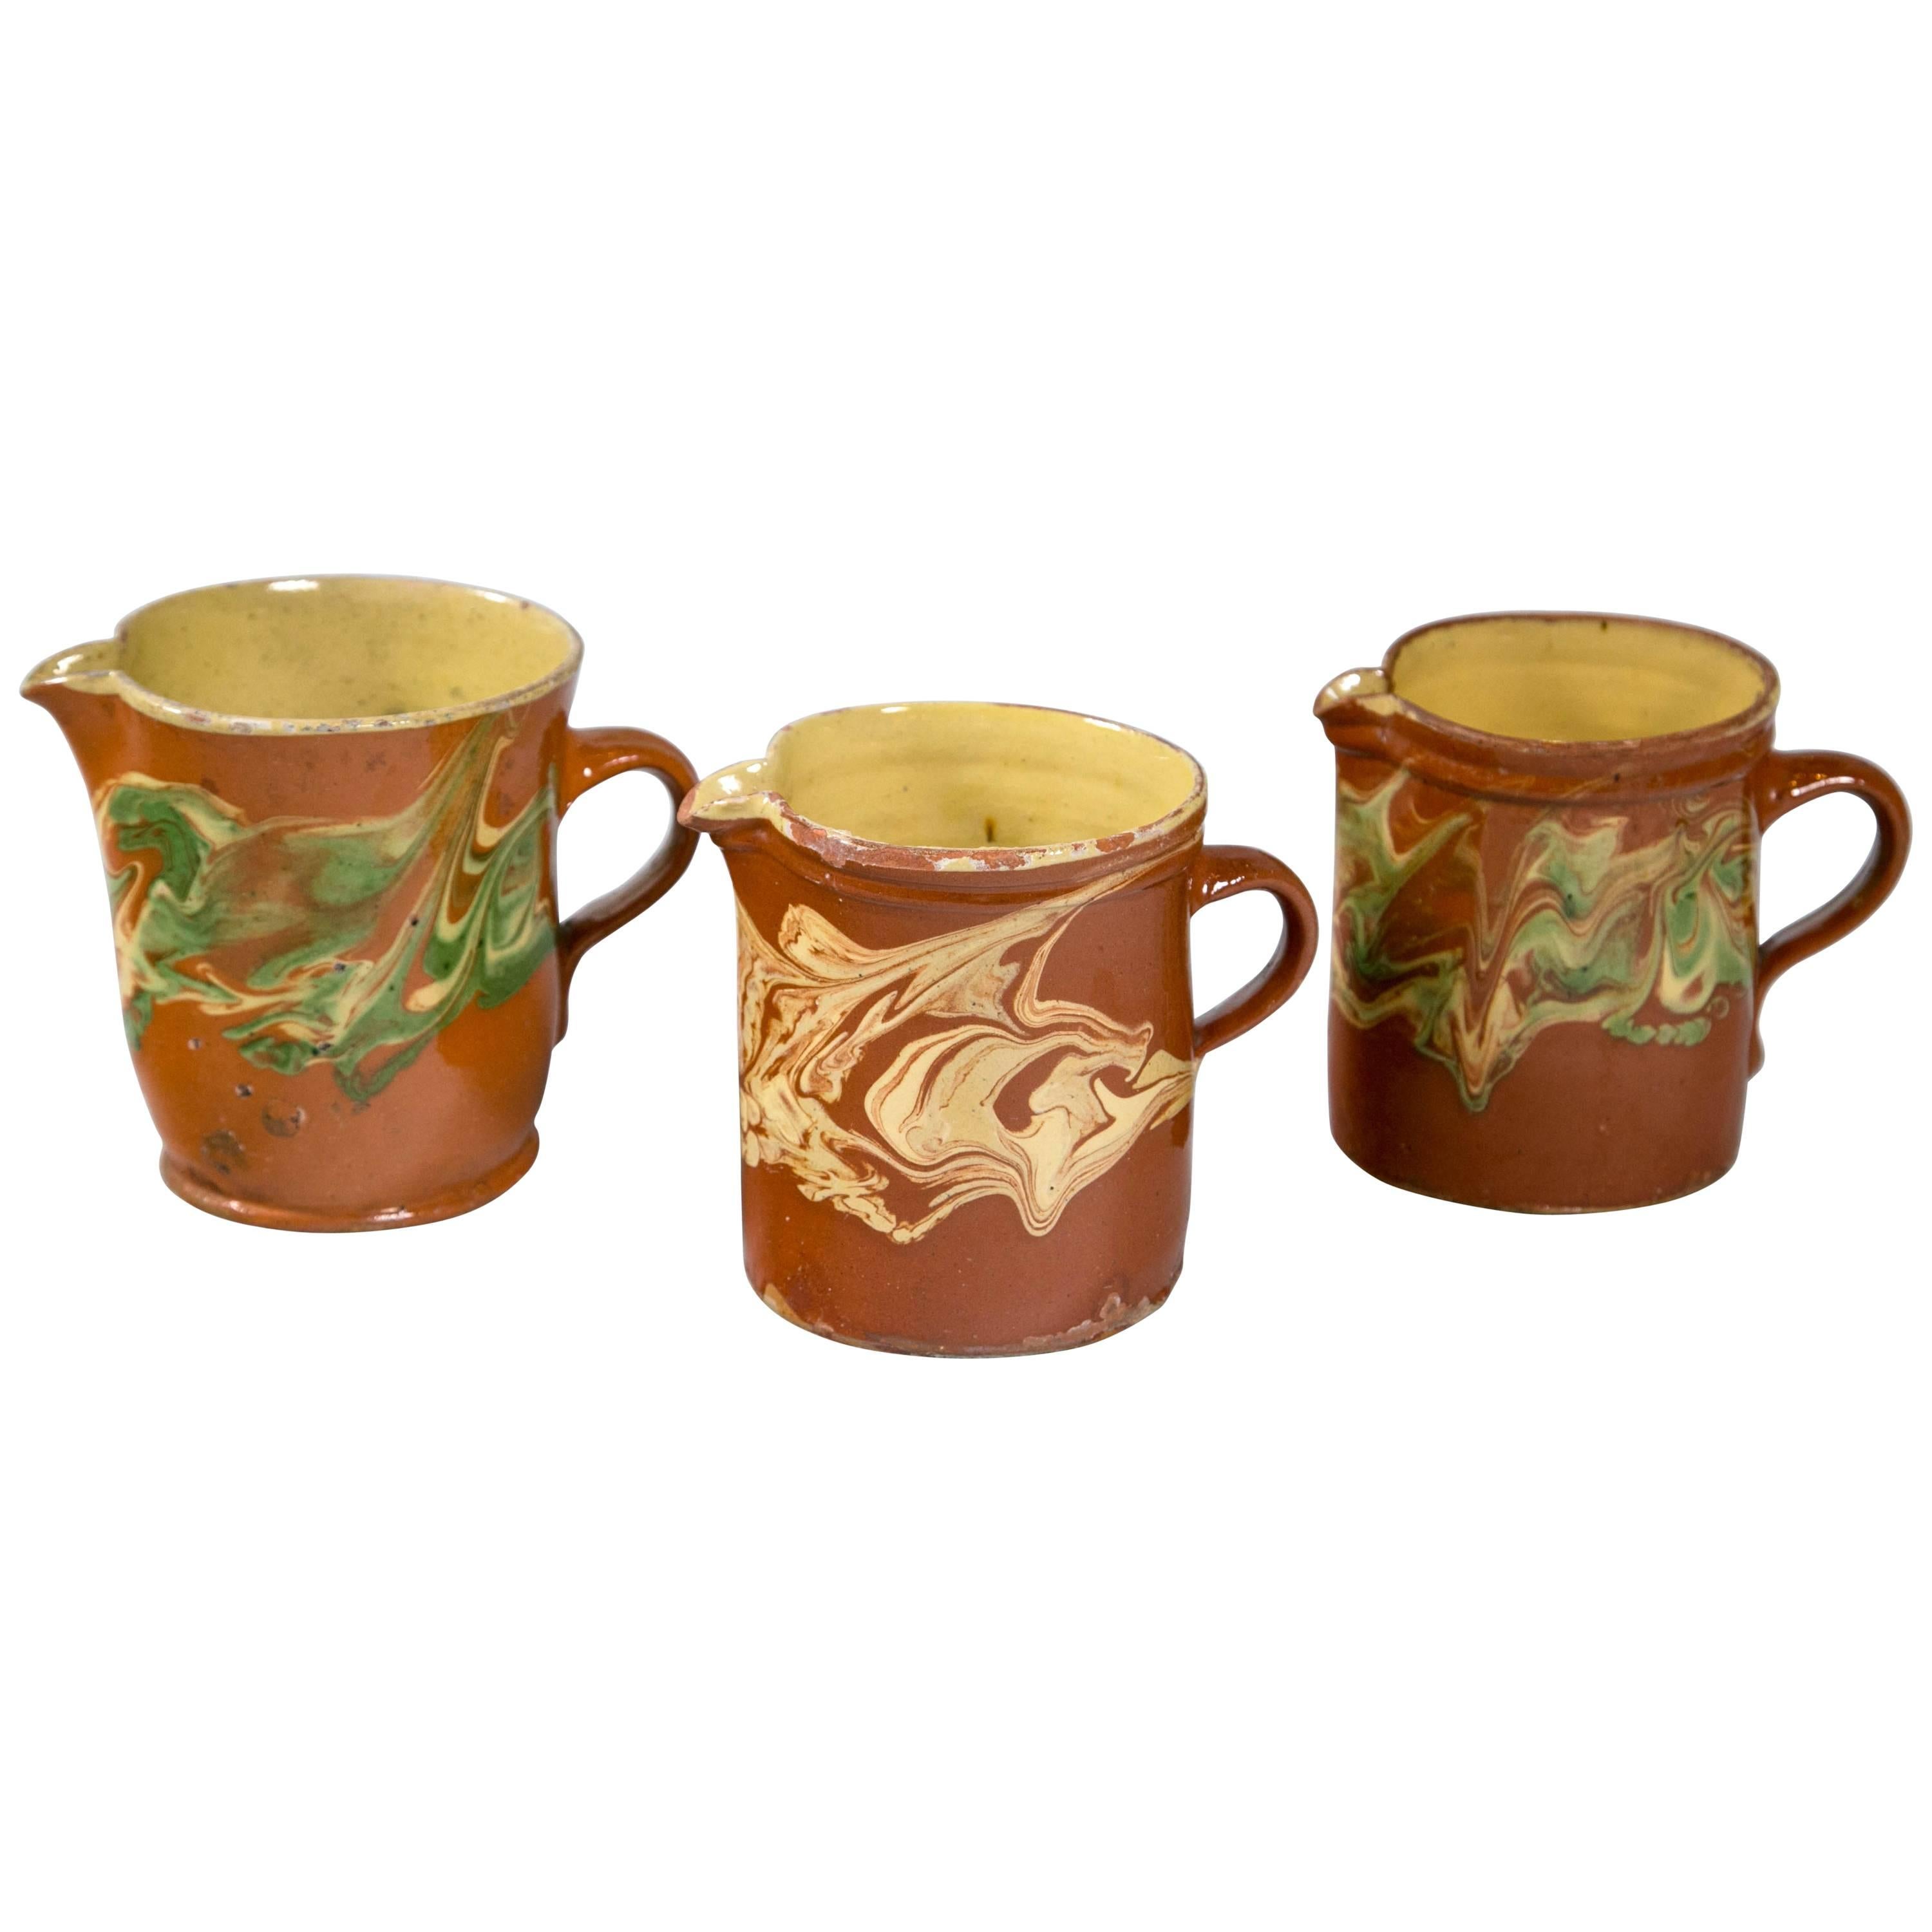 Collection of Three 'Jaspe' Pottery Pitchers, France, Late 19th Century